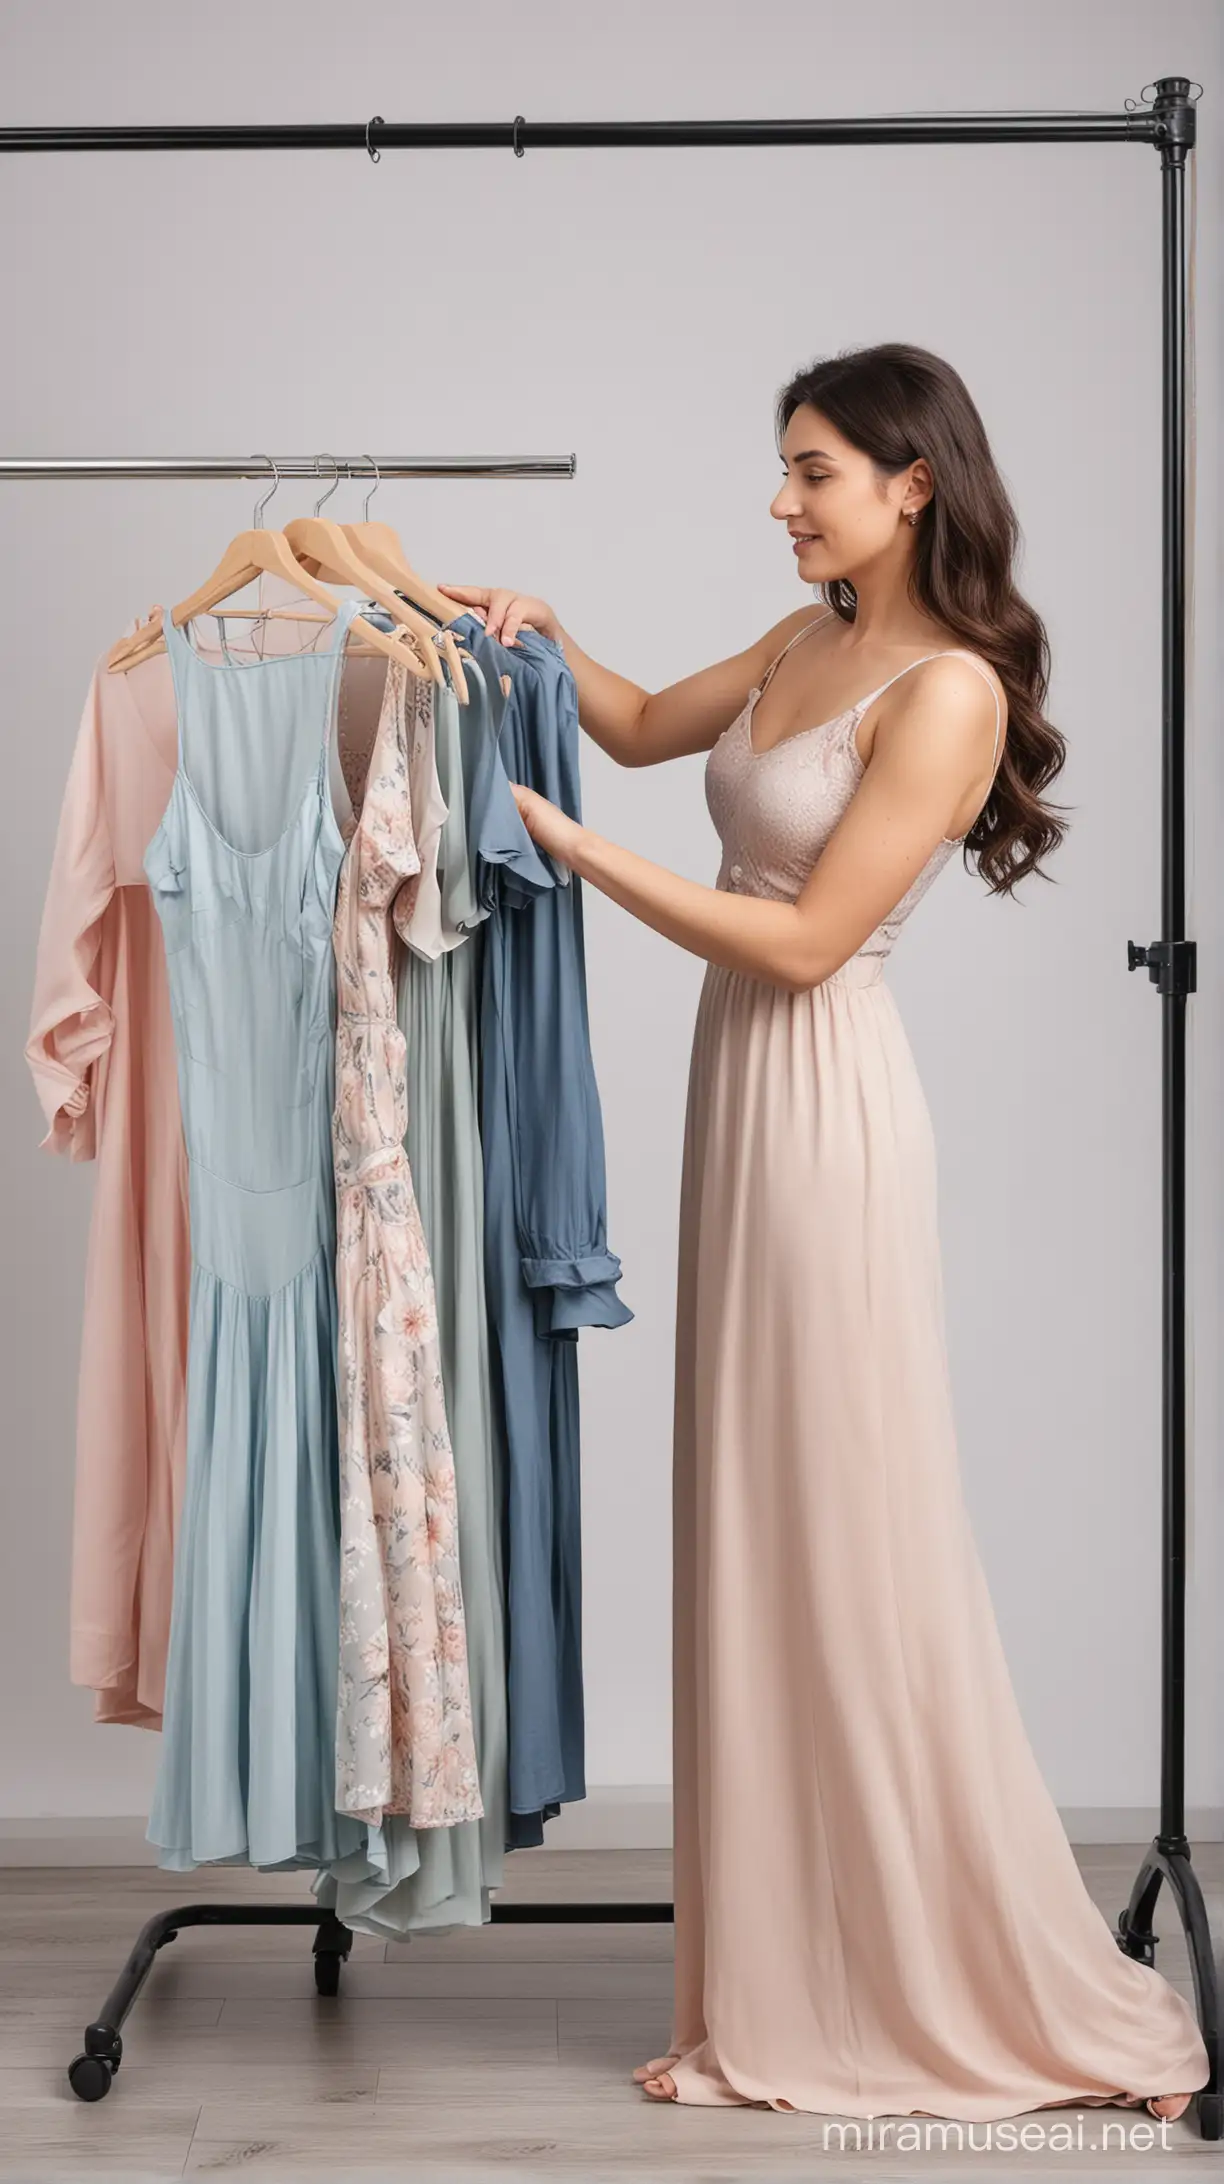 a lady who is choosing outfit from the cloths on a rack and her hands on the dress
in  a photography studio